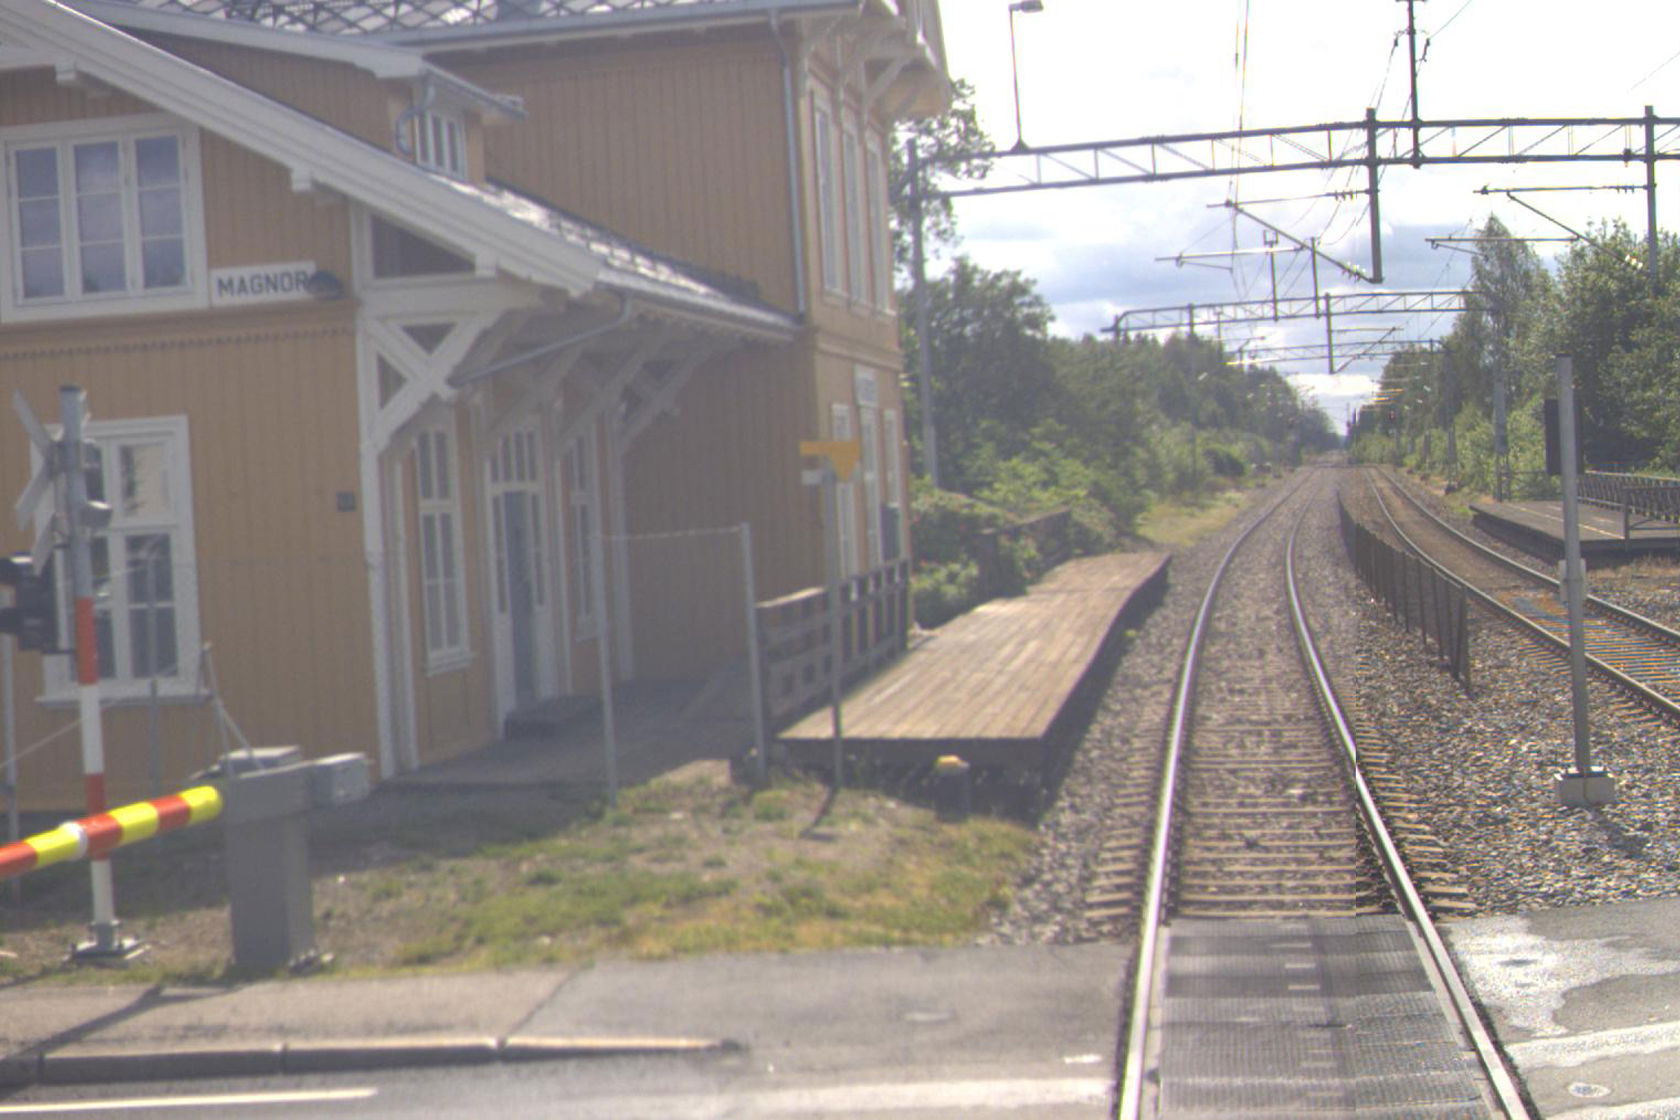 Tracks and station building at Magnor station